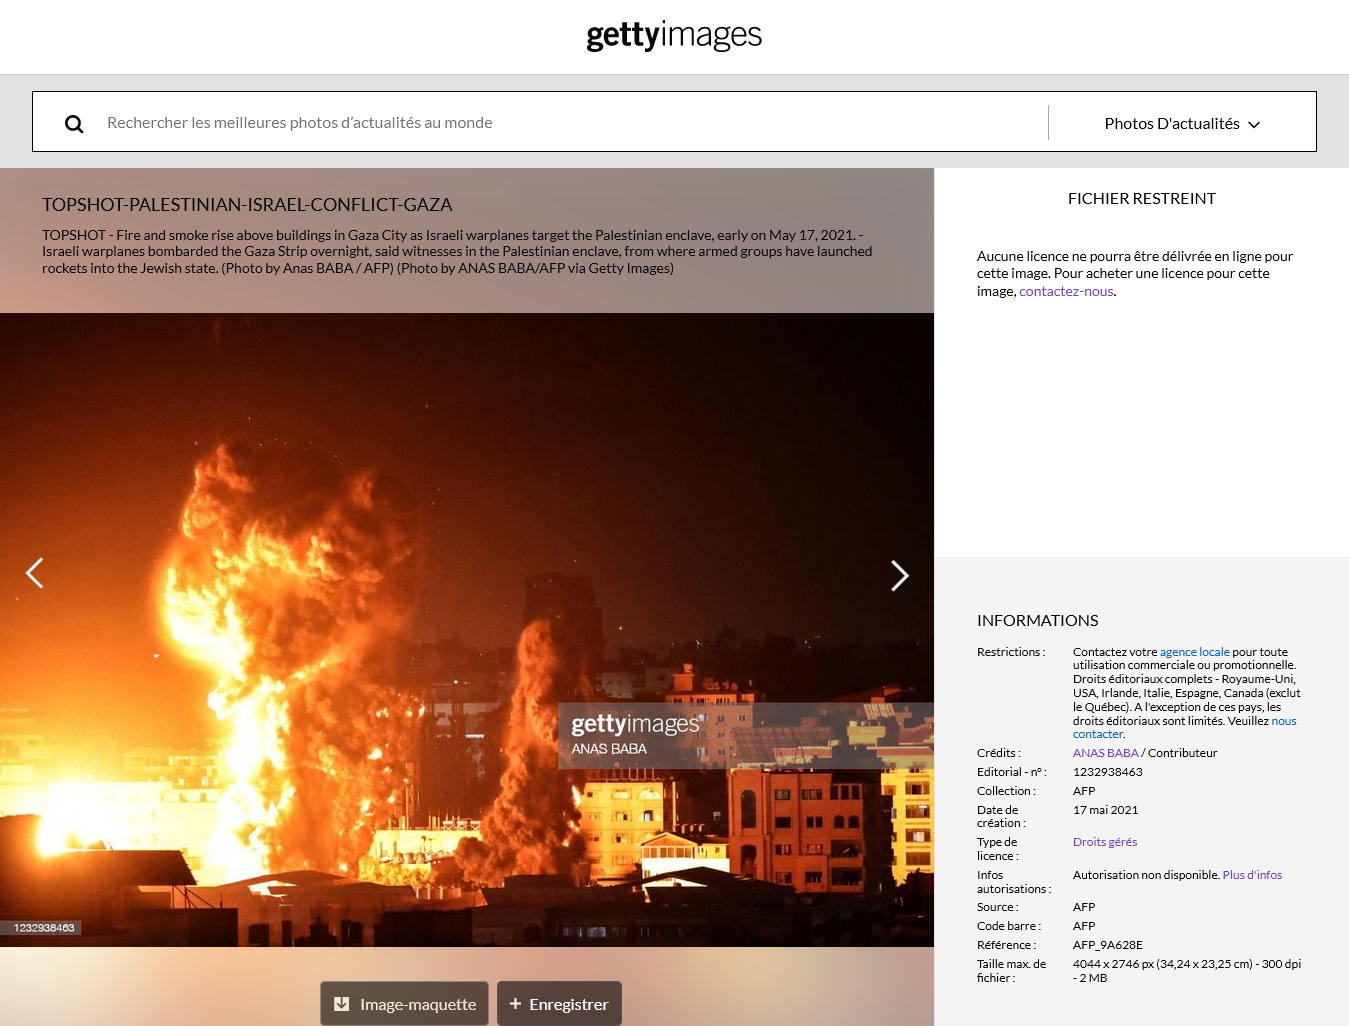 Screenshot 2022-09-01 TOPSHOT - Fire and smoke rise above buildings in Gaza City as Israeli_0.png